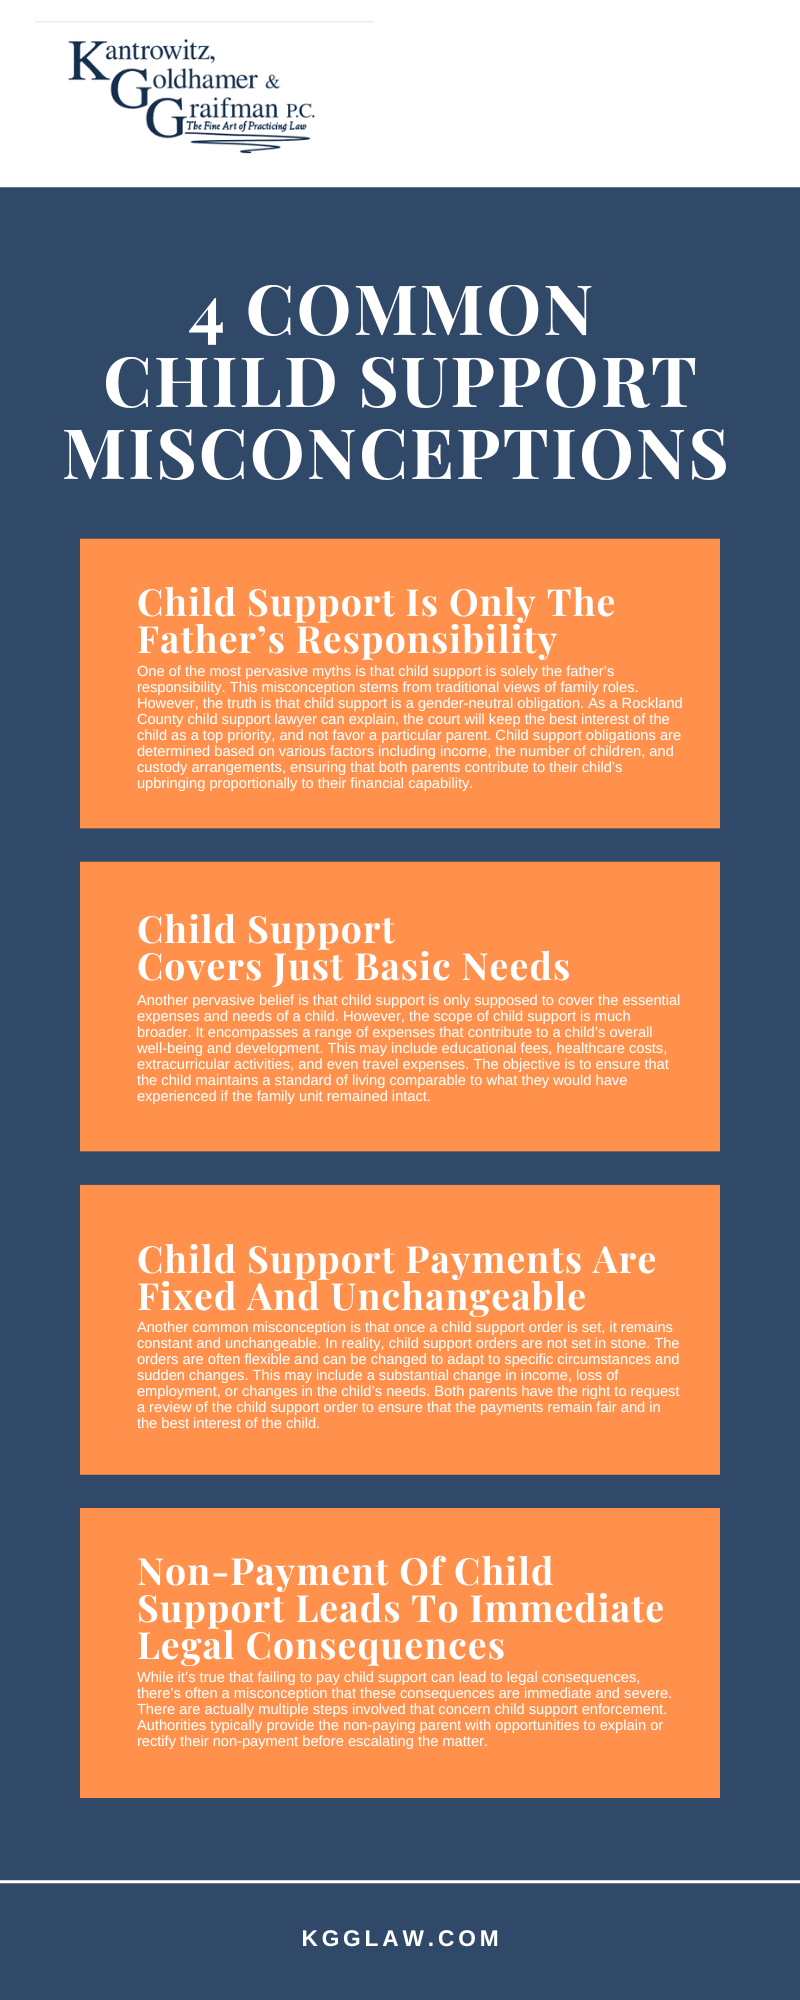 4 Common Child Support Misconceptions Infographic